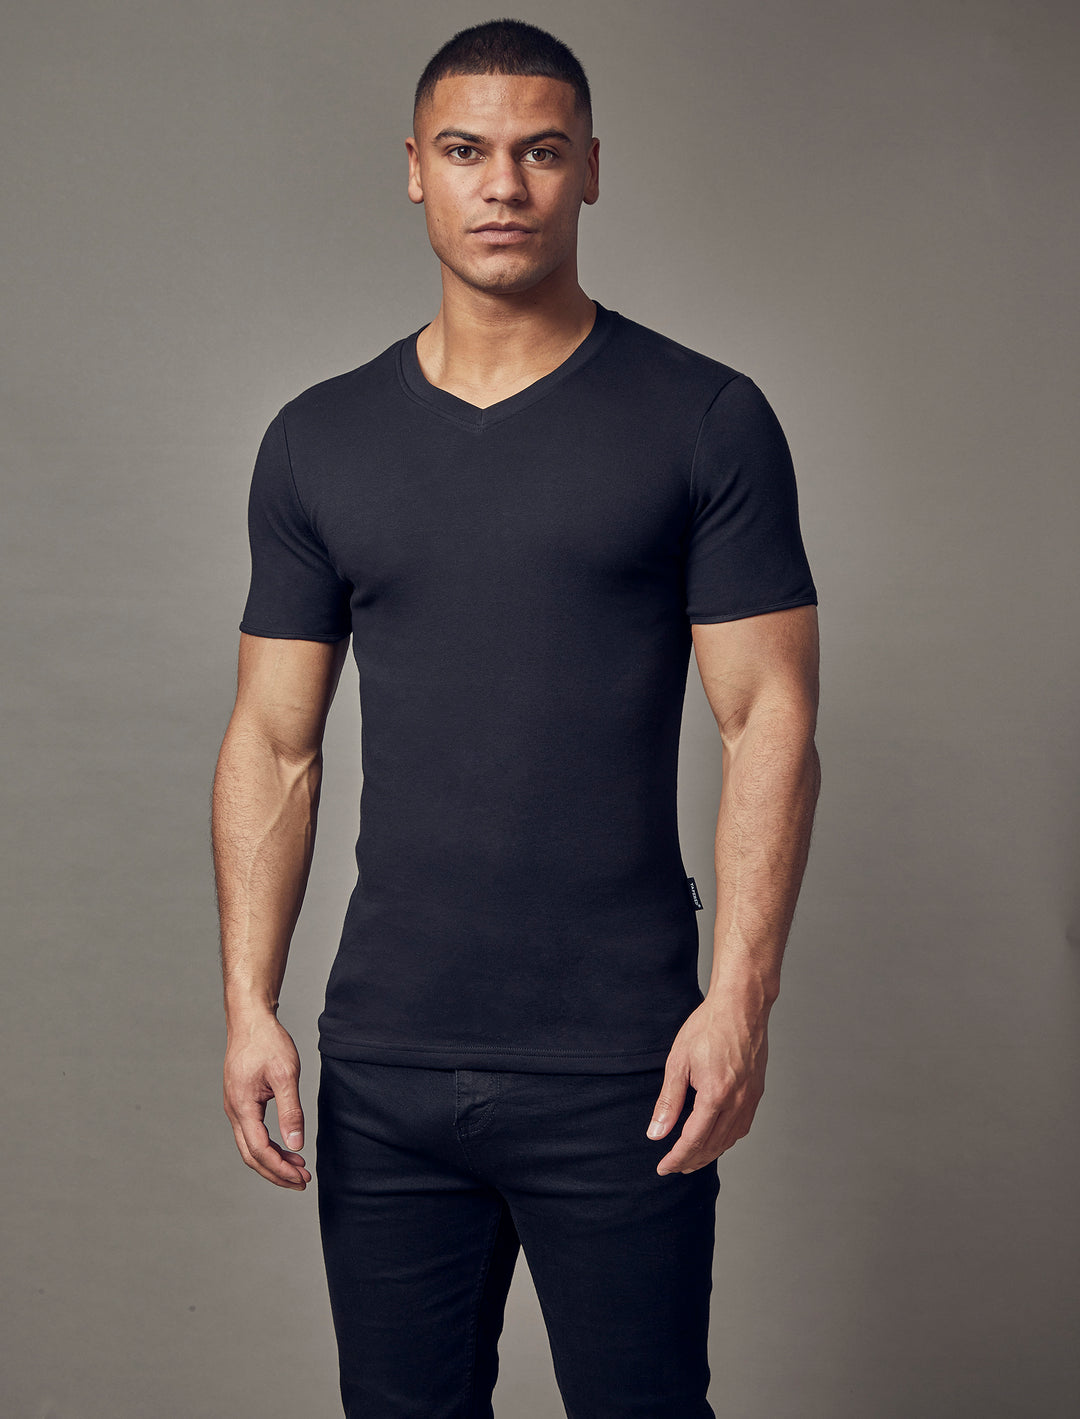 black V-neck tapered fit t-shirt by Tapered Menswear, highlighting the muscle fit design for an attractive and comfortable silhouette